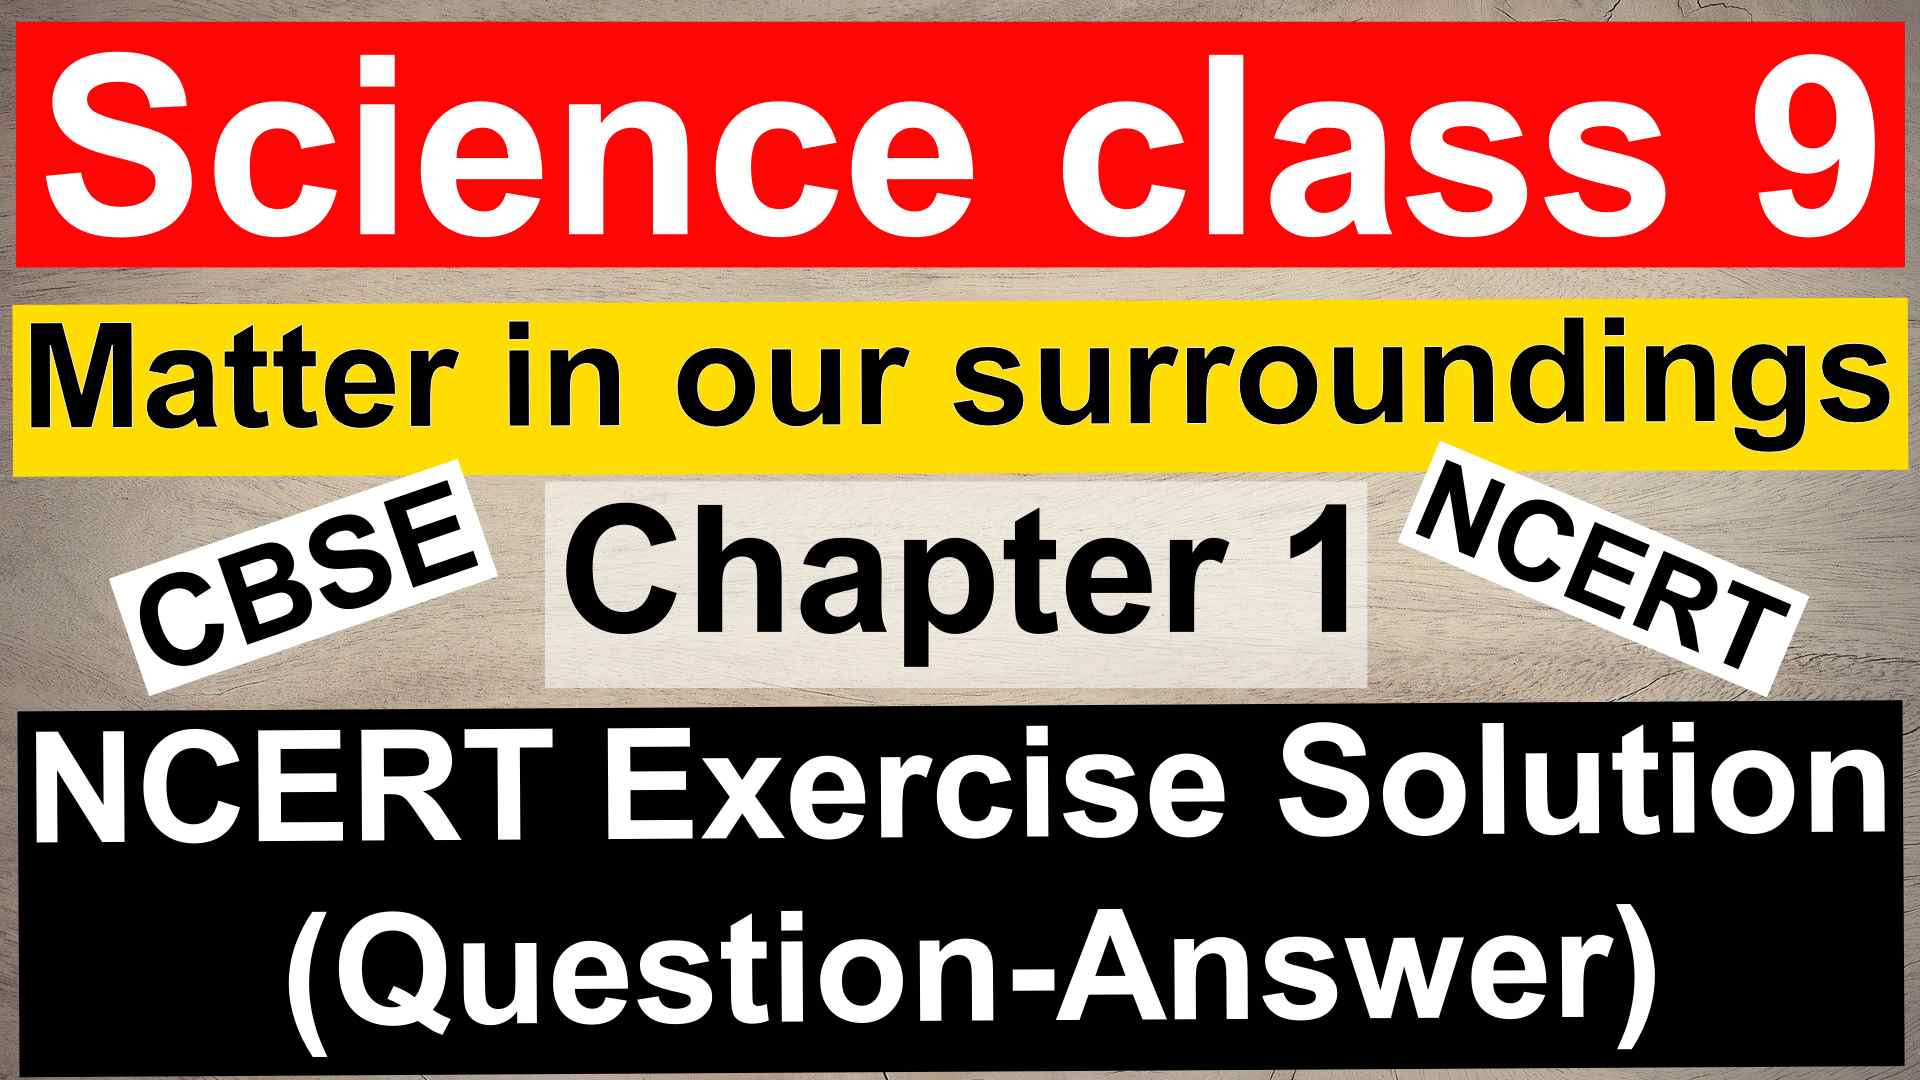 Science class 9- Chapter 1-Matter in our surroundings– NCERT Exercise Solution ( Question-Answer)